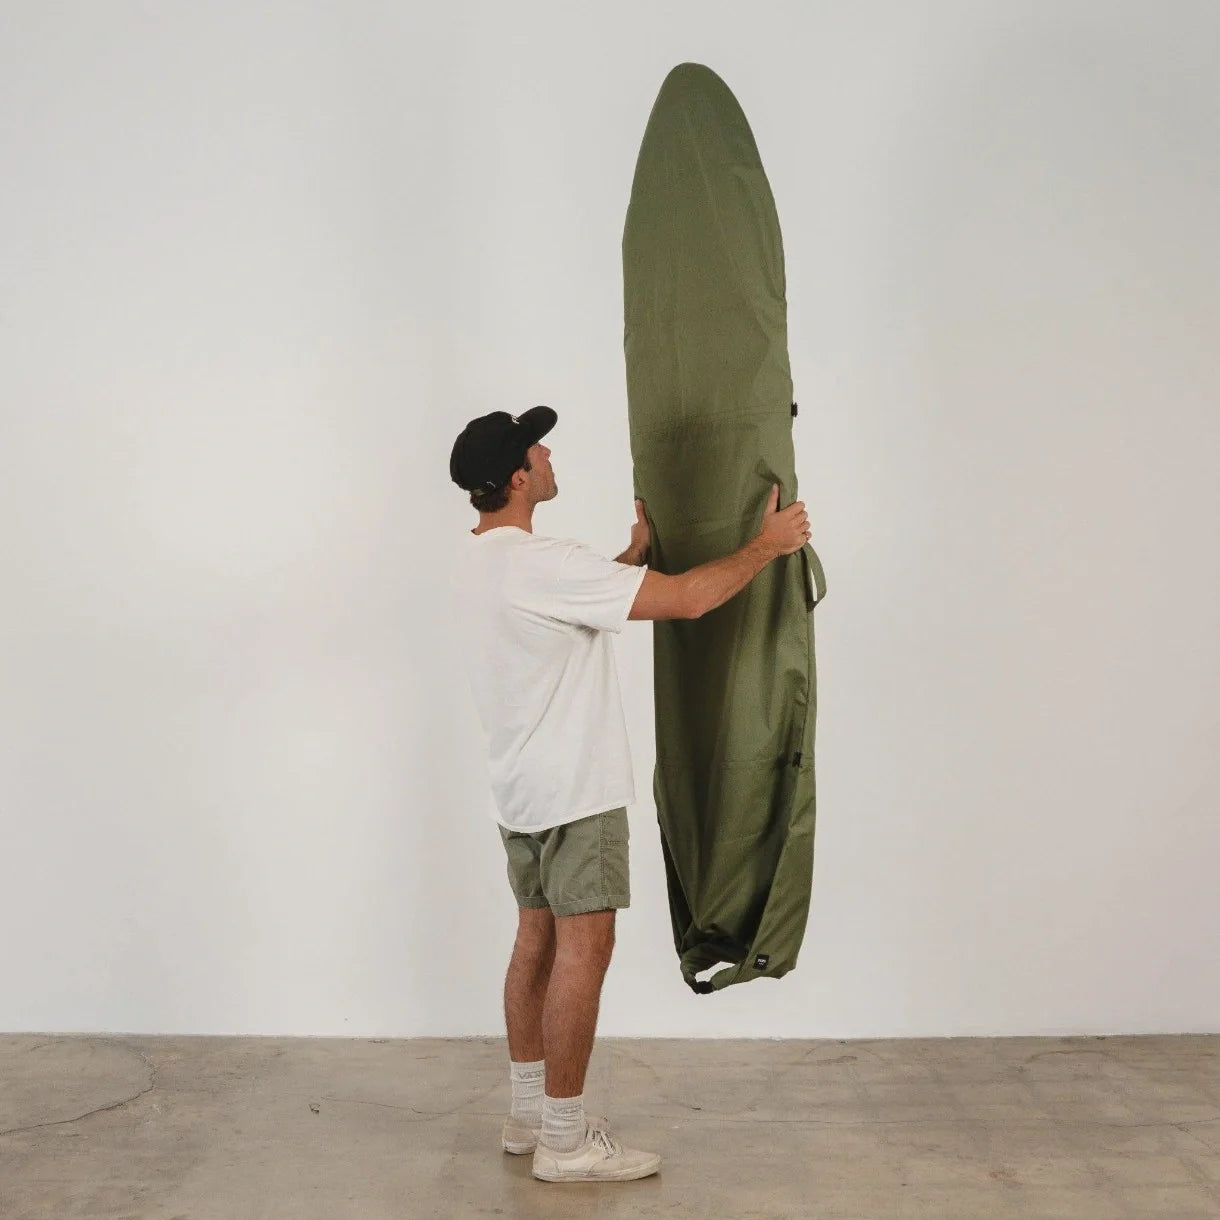 Olive Drab Canvas Surfboard Bag by Faro Board Bags